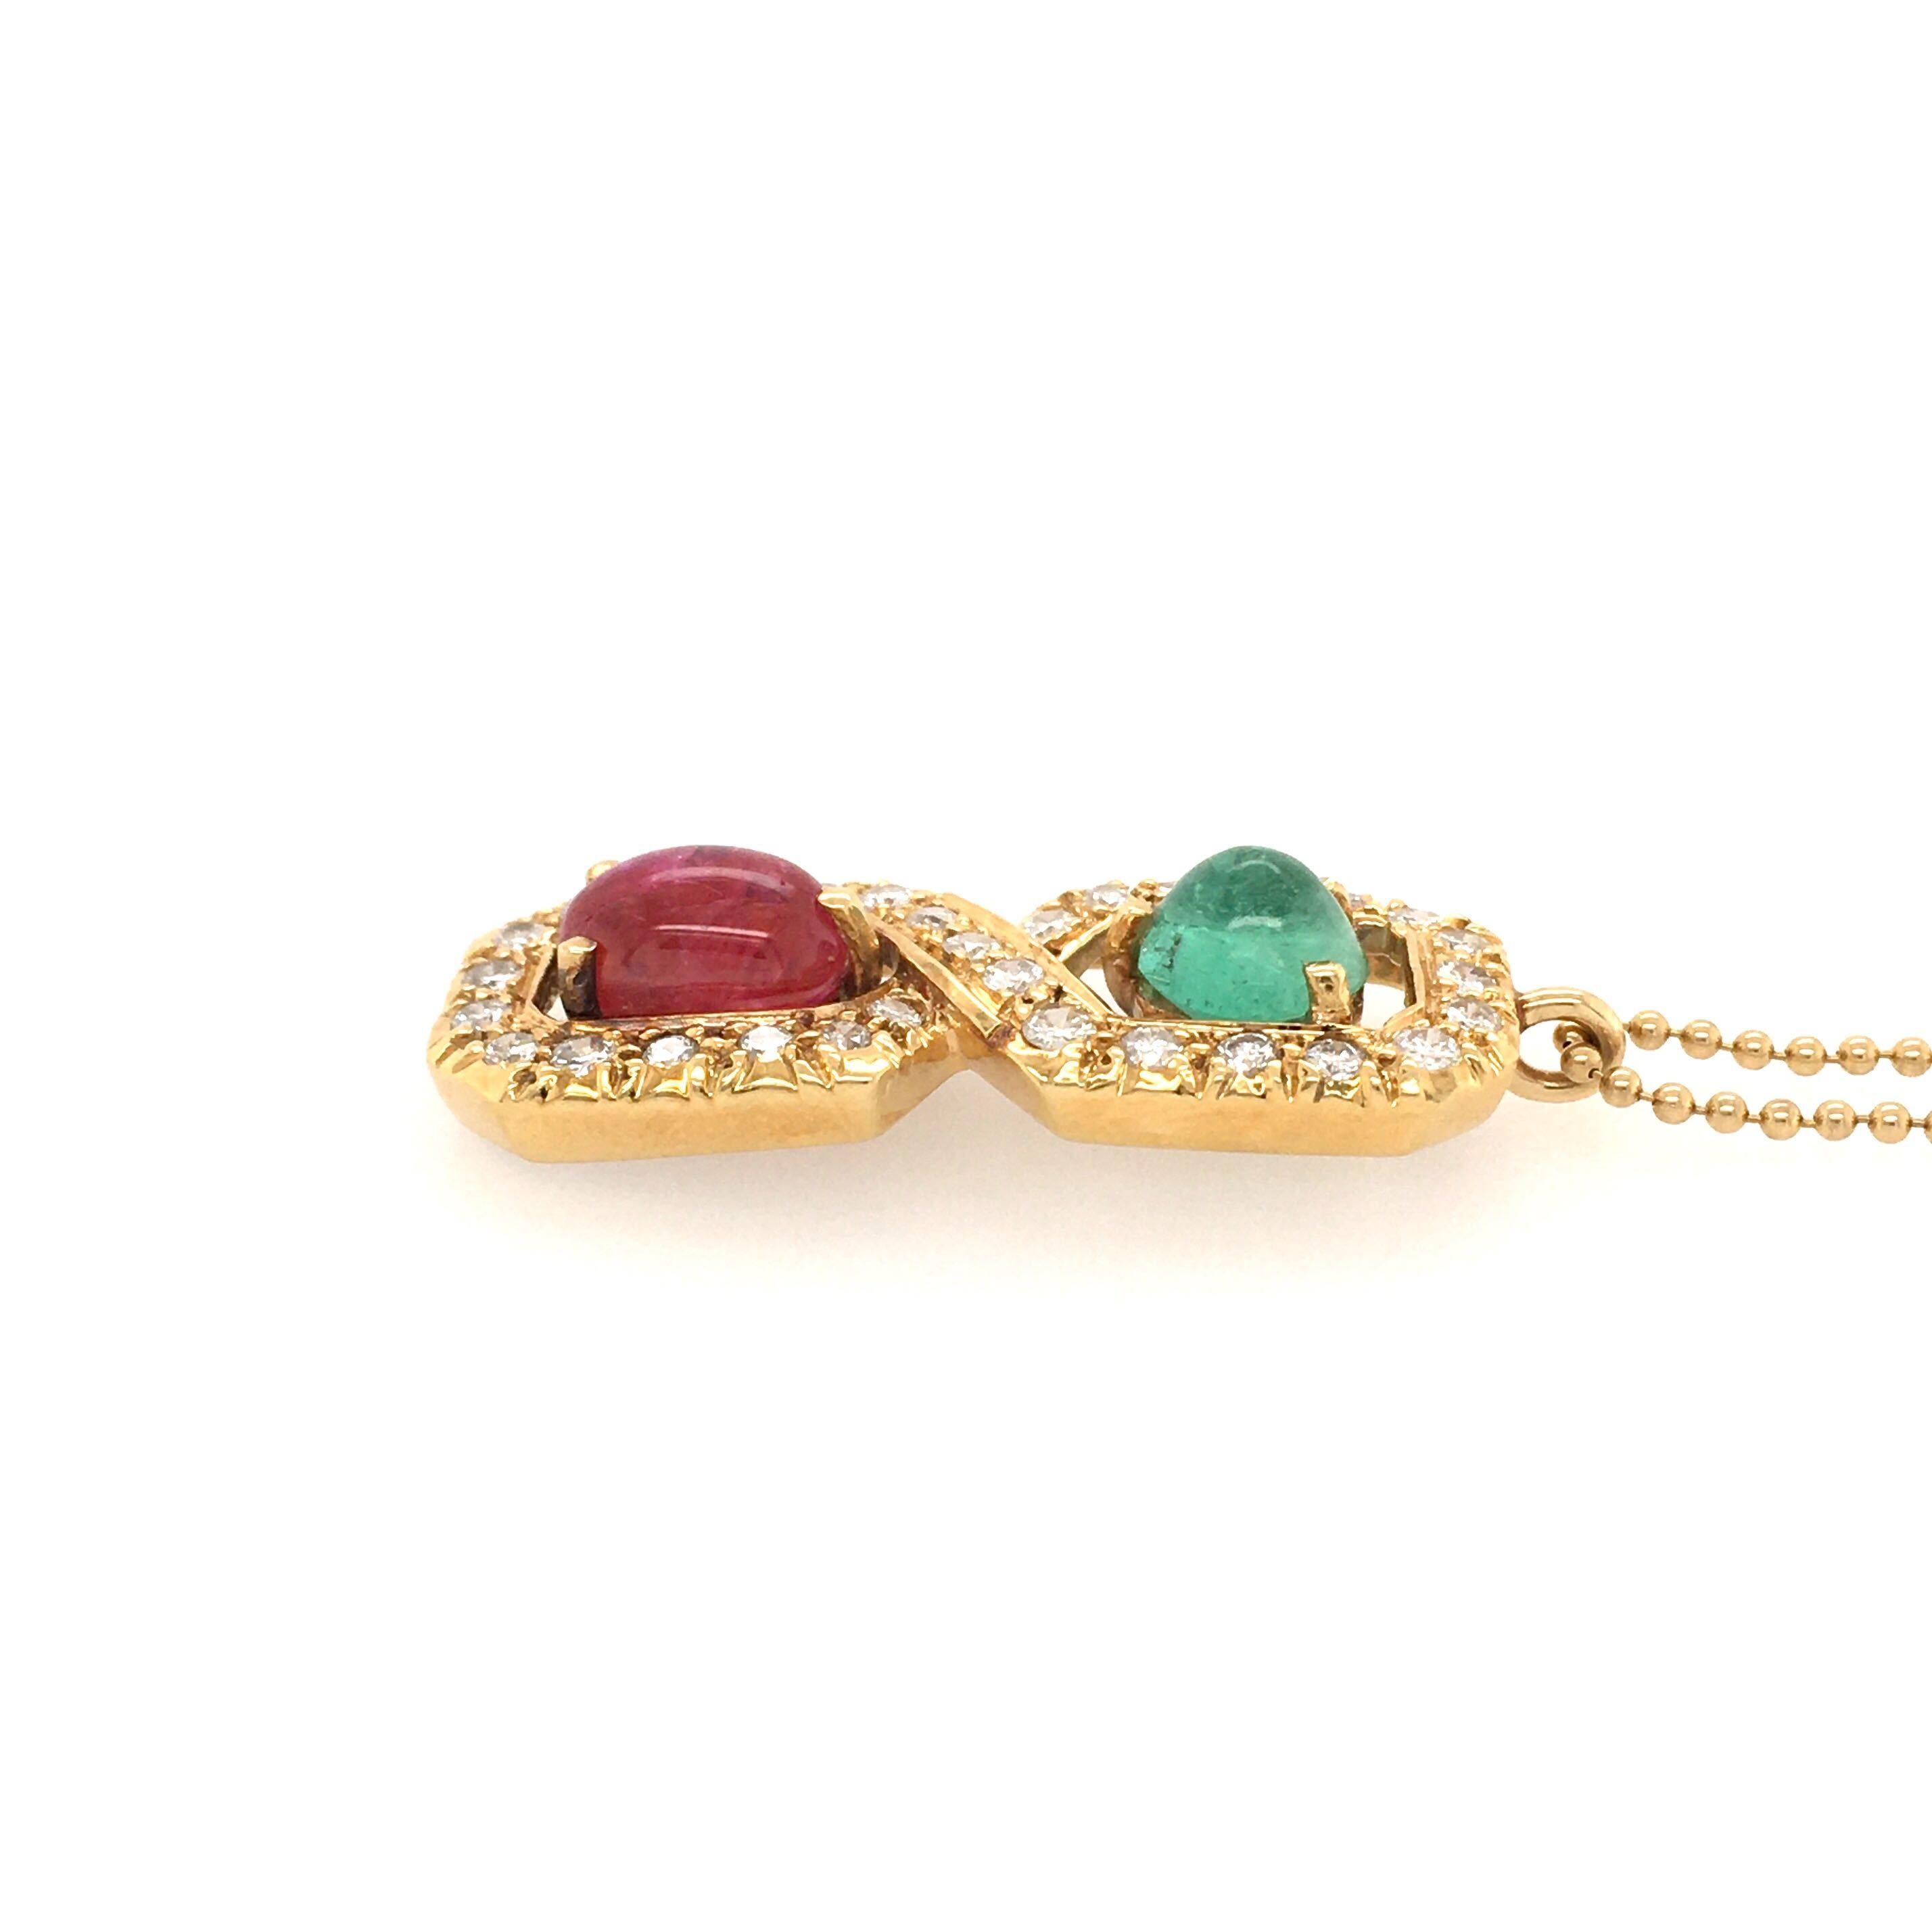 An 18 karat yellow gold, ruby, emerald and diamond pendant, with 14 karat yellow gold bead chain. Designed as a circular cut diamond set figure 8 pendant, set with an oval cabochon ruby, weighing approximately 2.40 carats and a circular sugarloaf